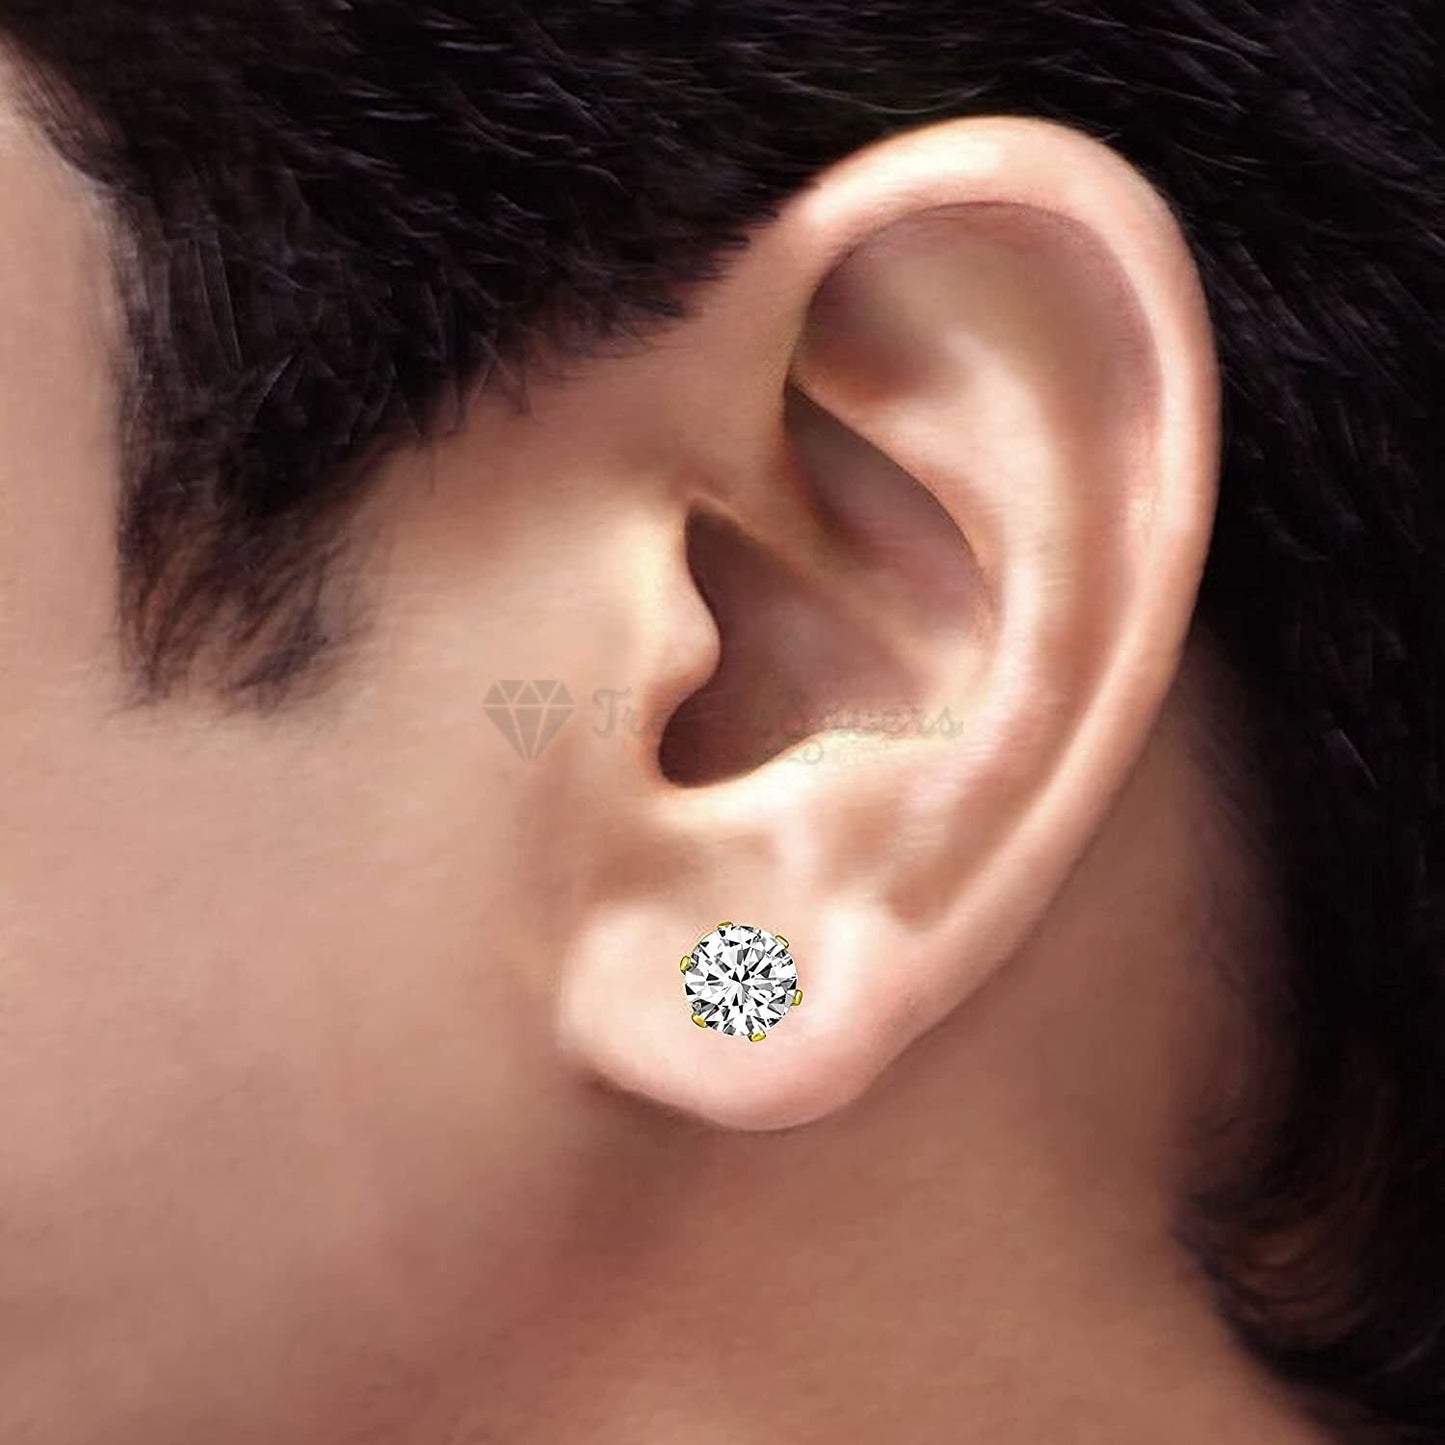 7MM Pair Elegant Gold Plated Cartilage Solitaire CZ Cubic Zirconia Stud Earrings